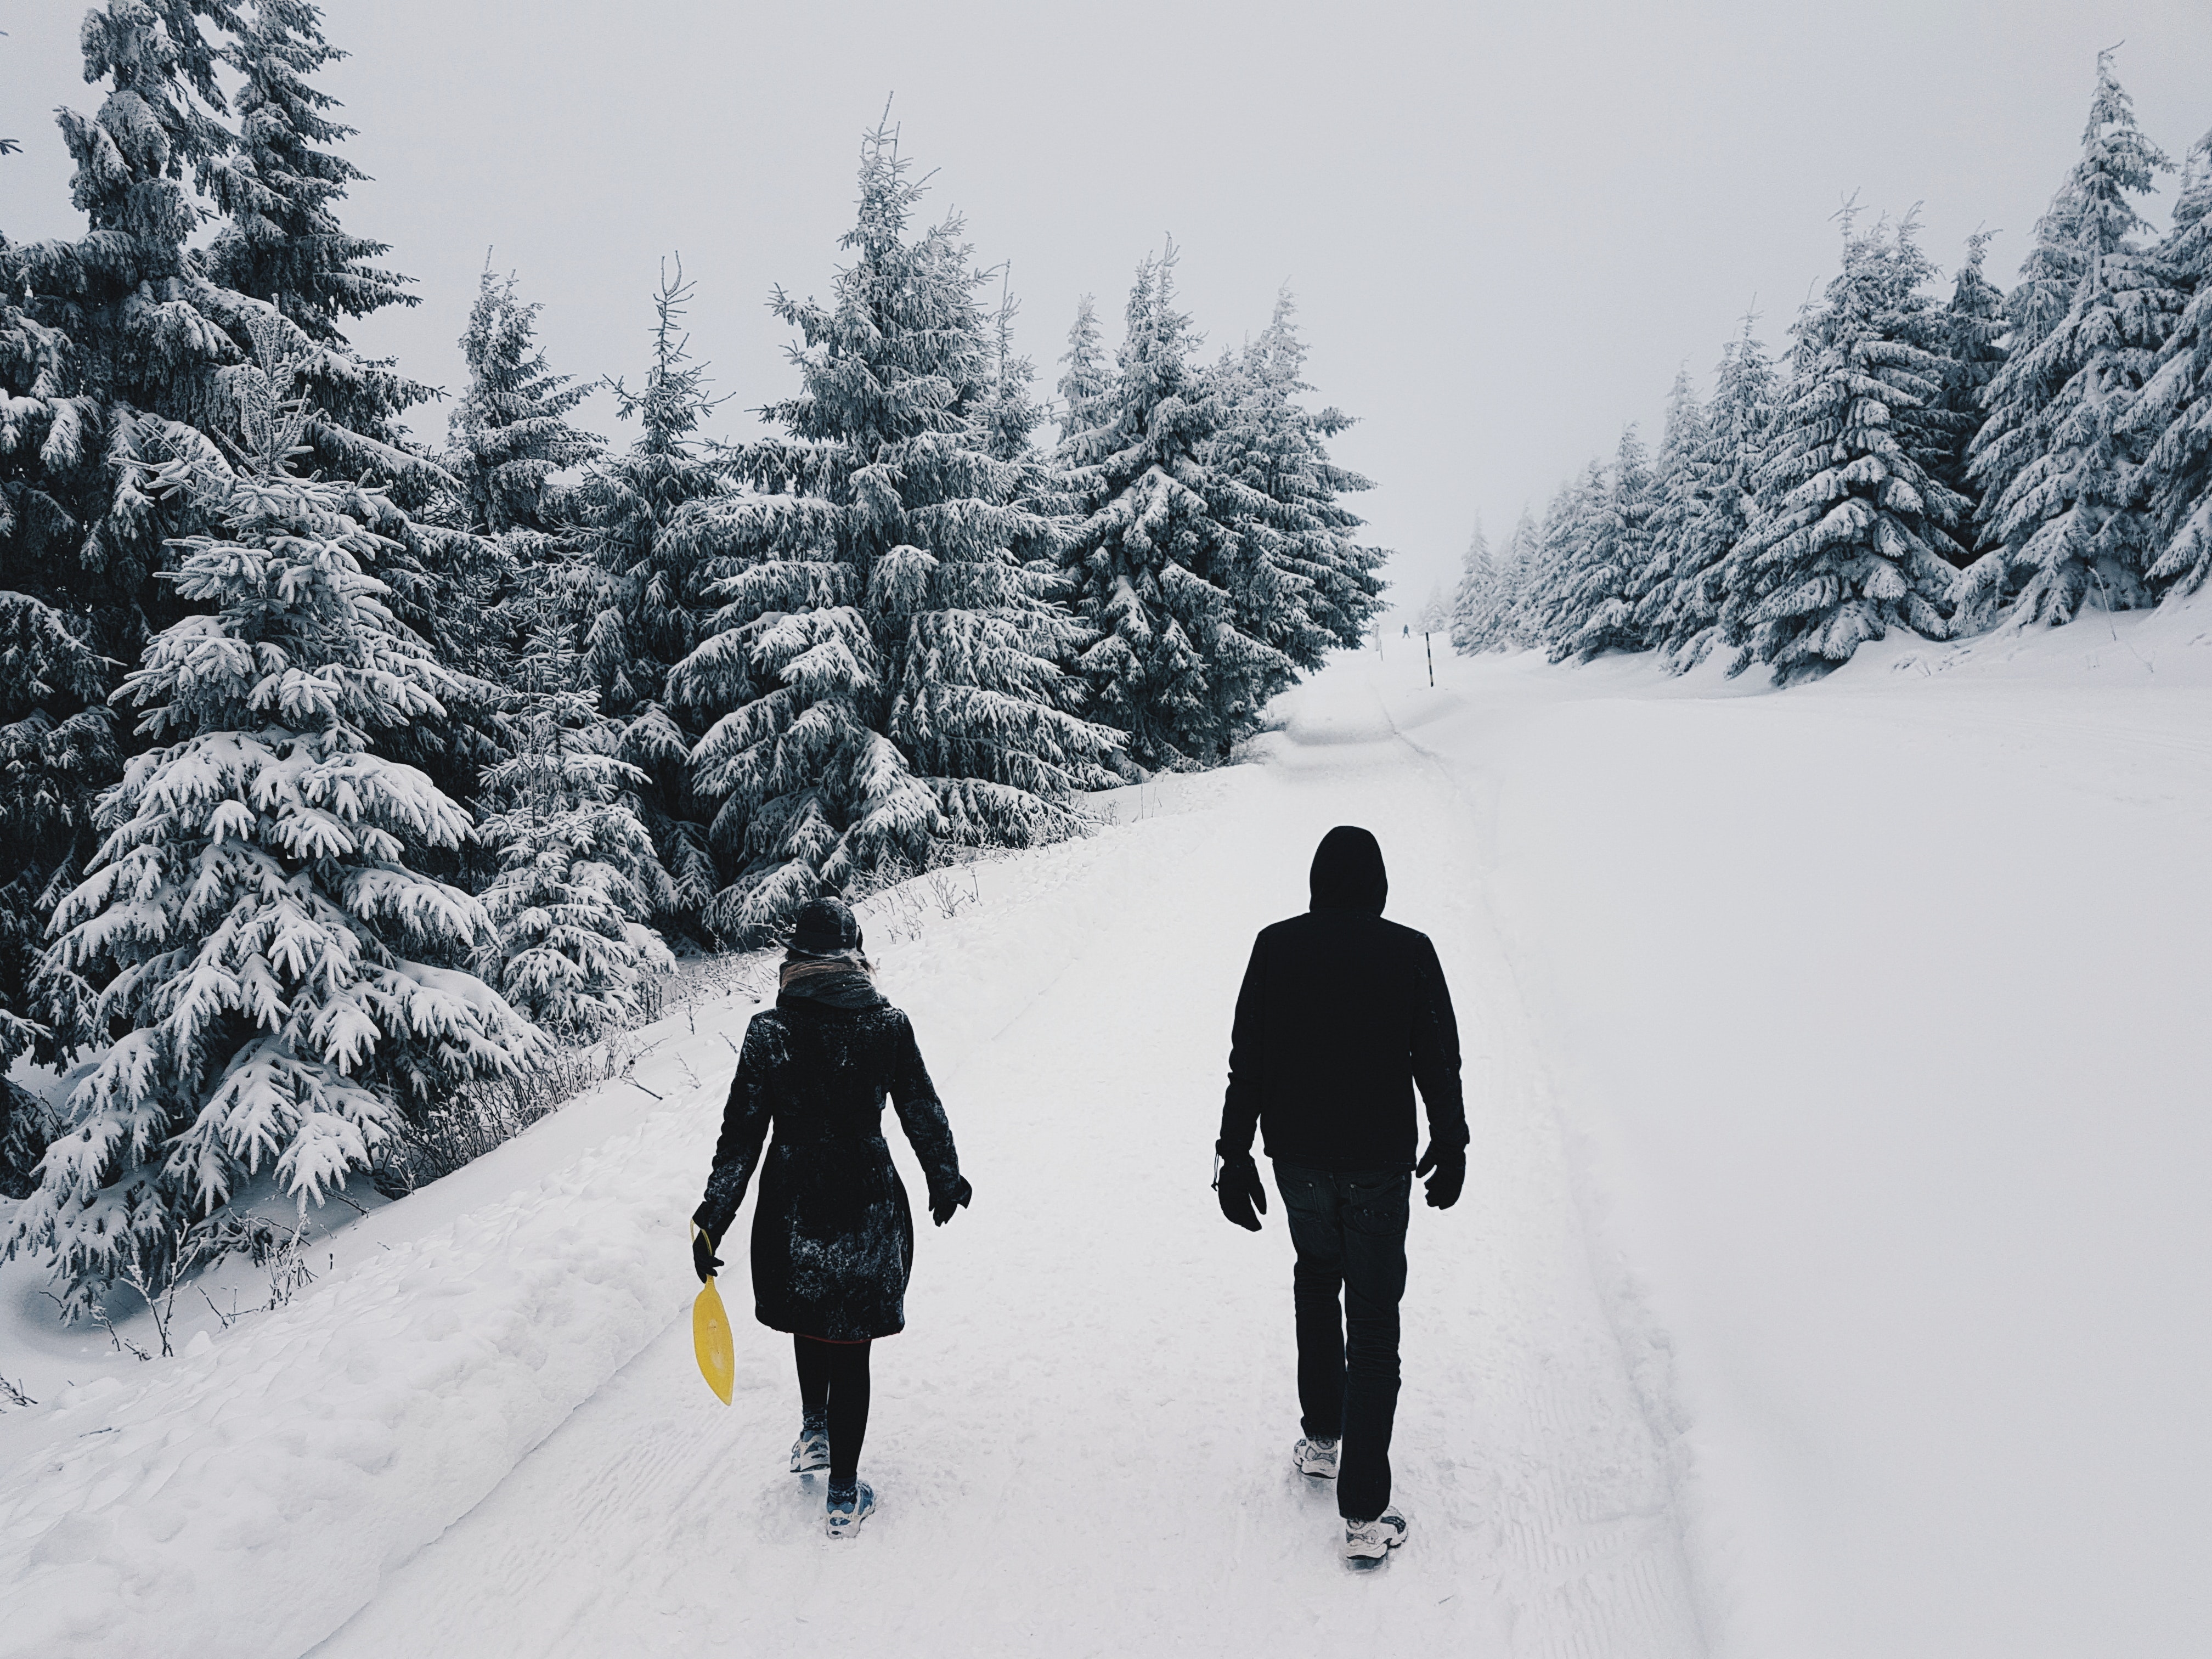 Photograph of two persons in the middle of the road on a snowy setting